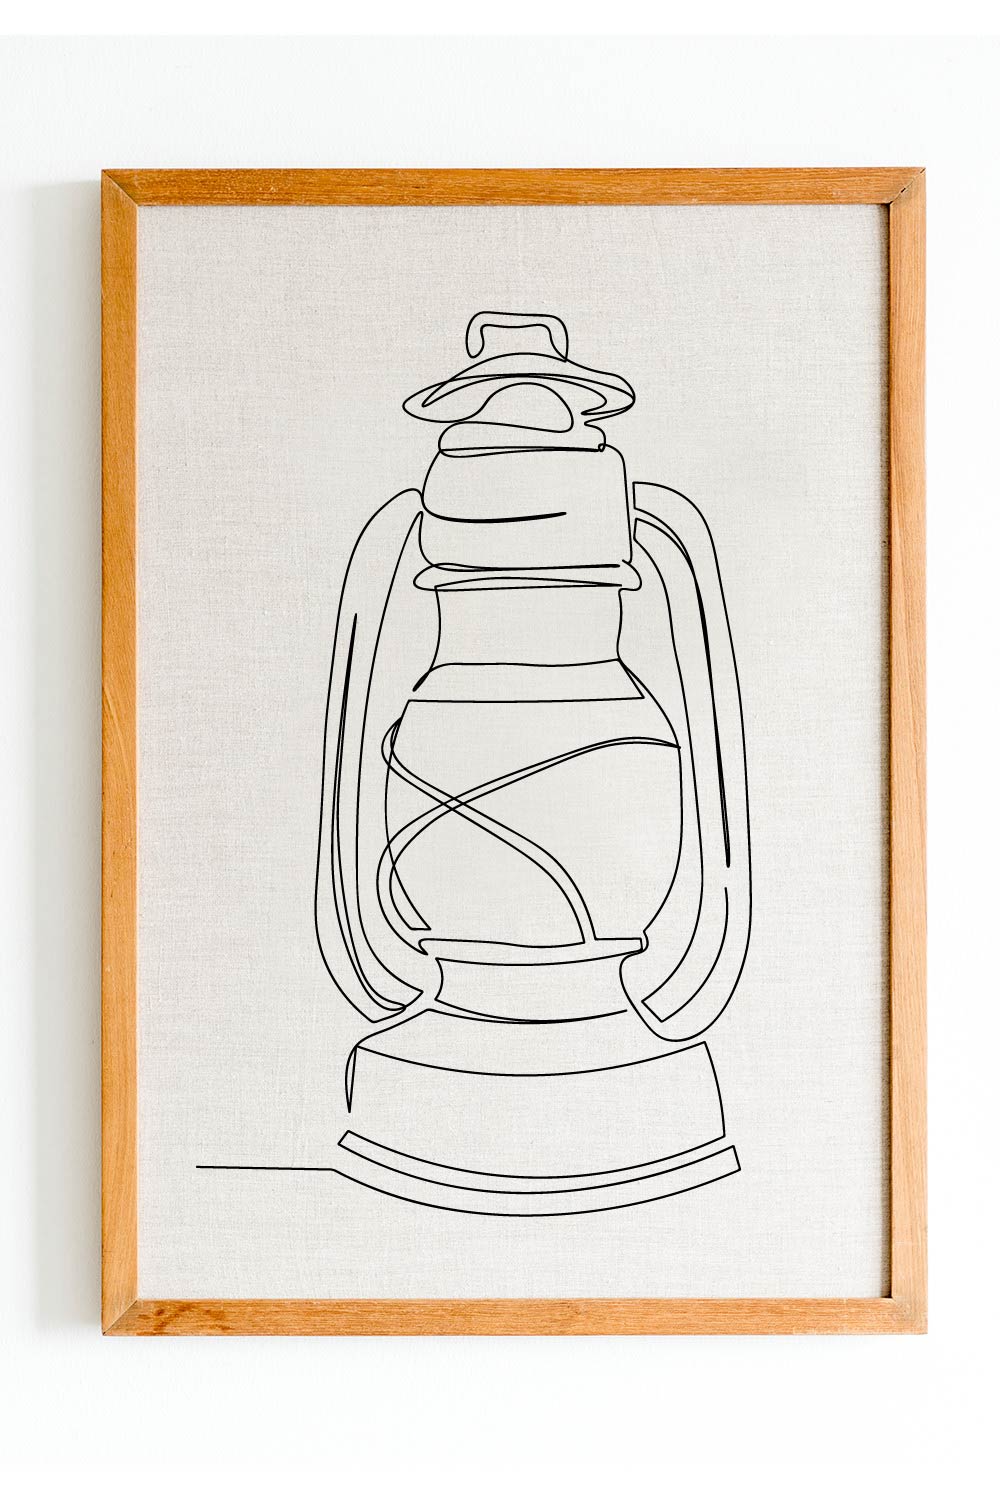 Lamp Single Line Art Drawing For Personal Or Commercial Use pinterest preview image.